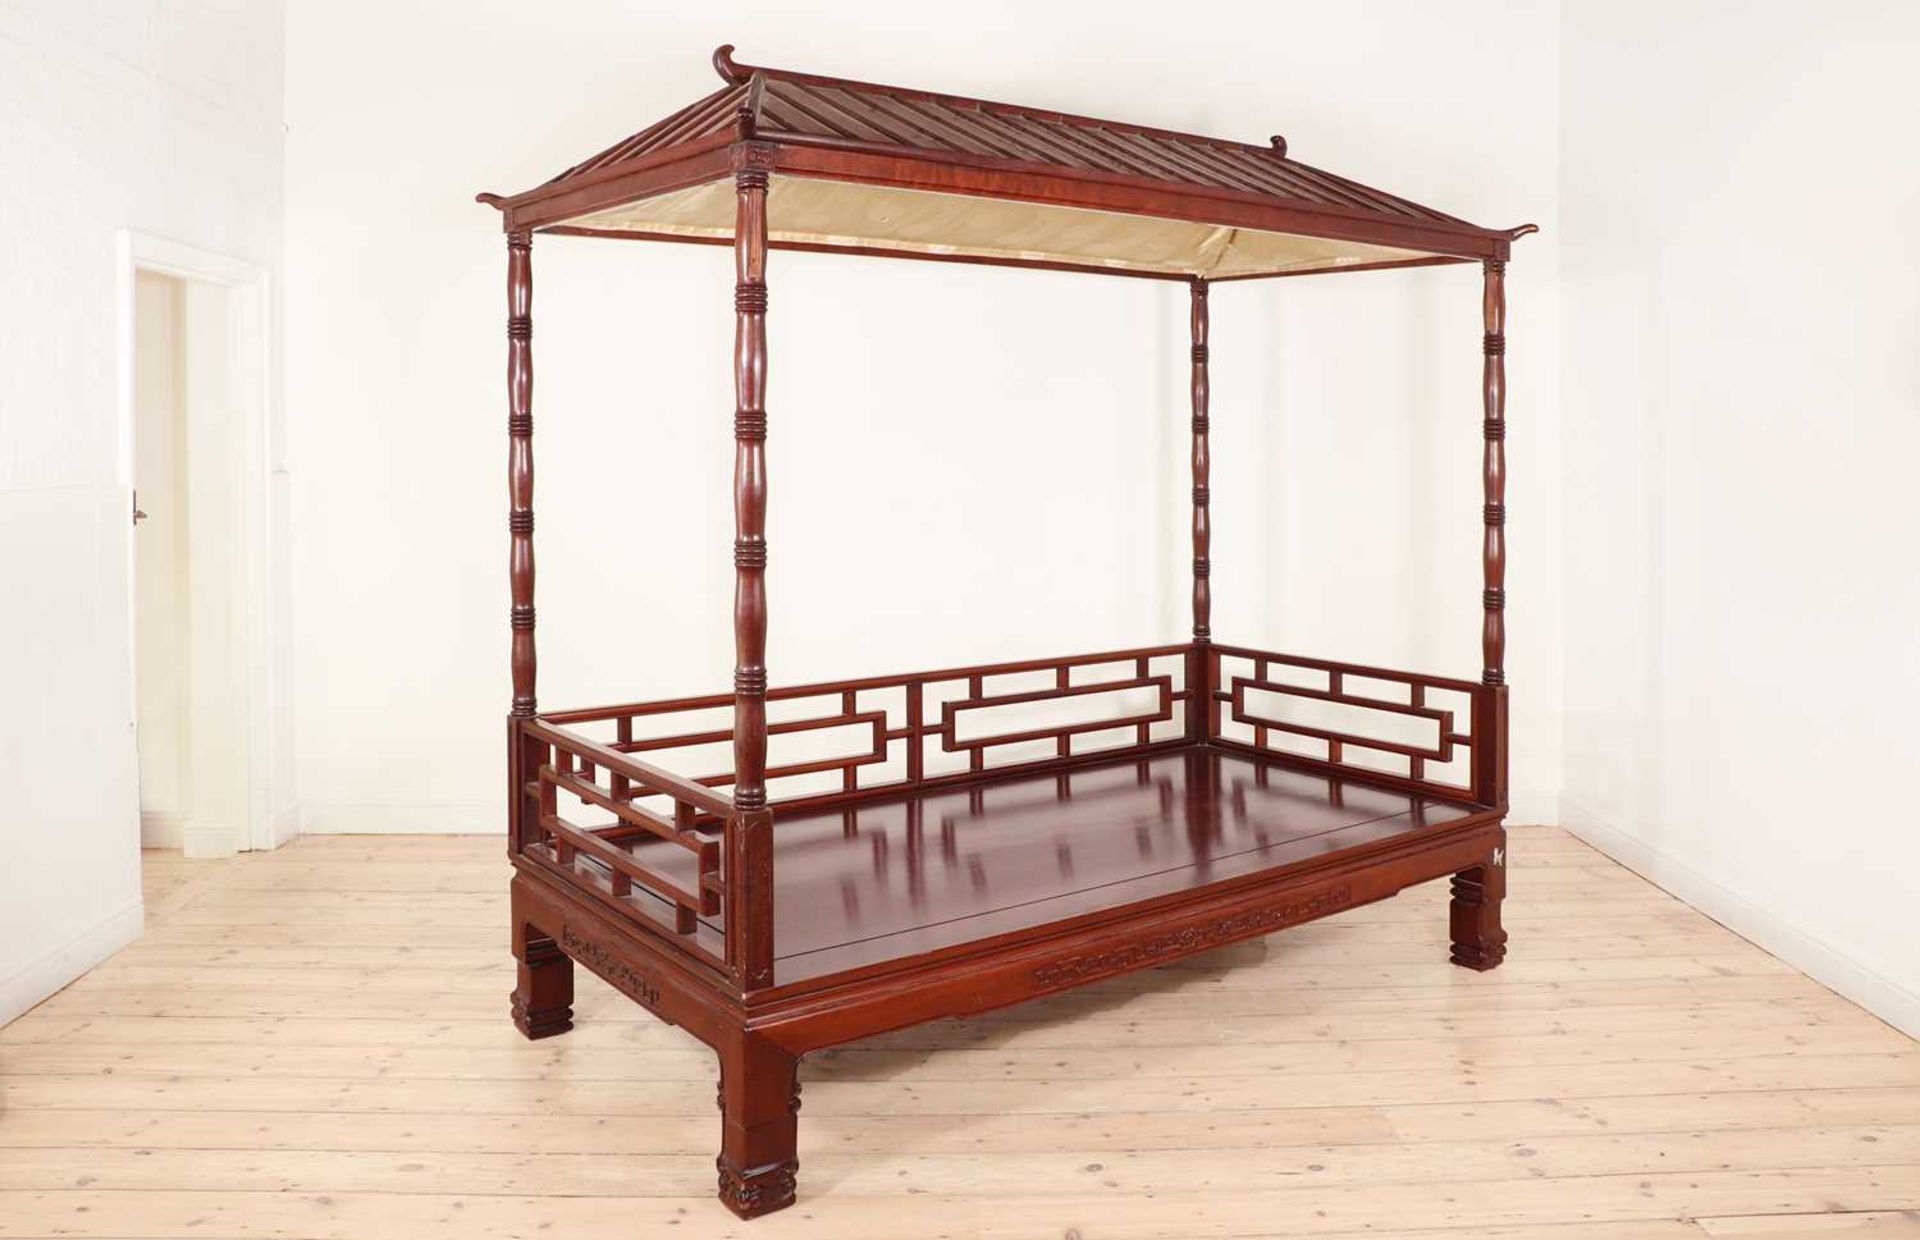 A hardwood daybed in the Chinese Qing dynasty style, - Image 2 of 9